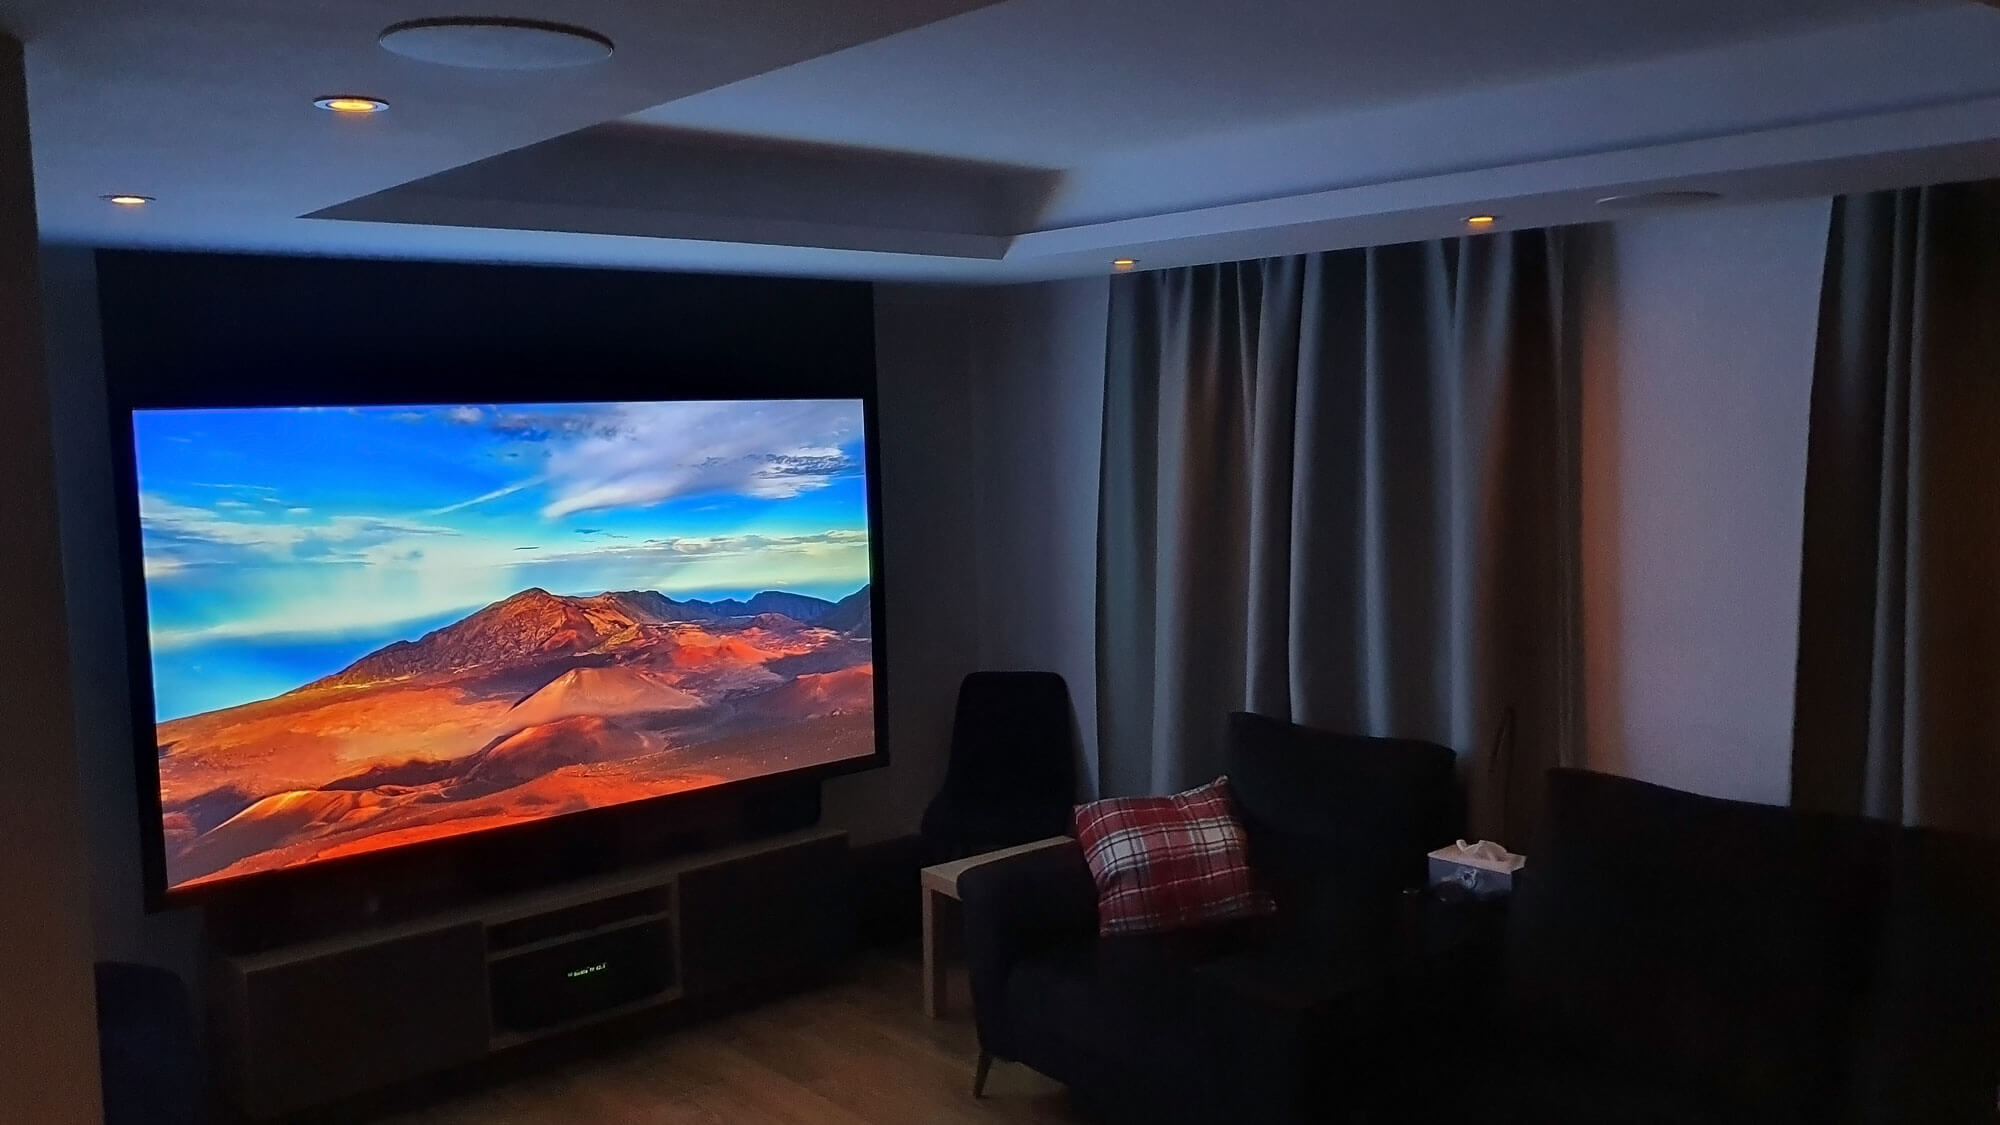 Dark living room with projector screen showing mountain scene